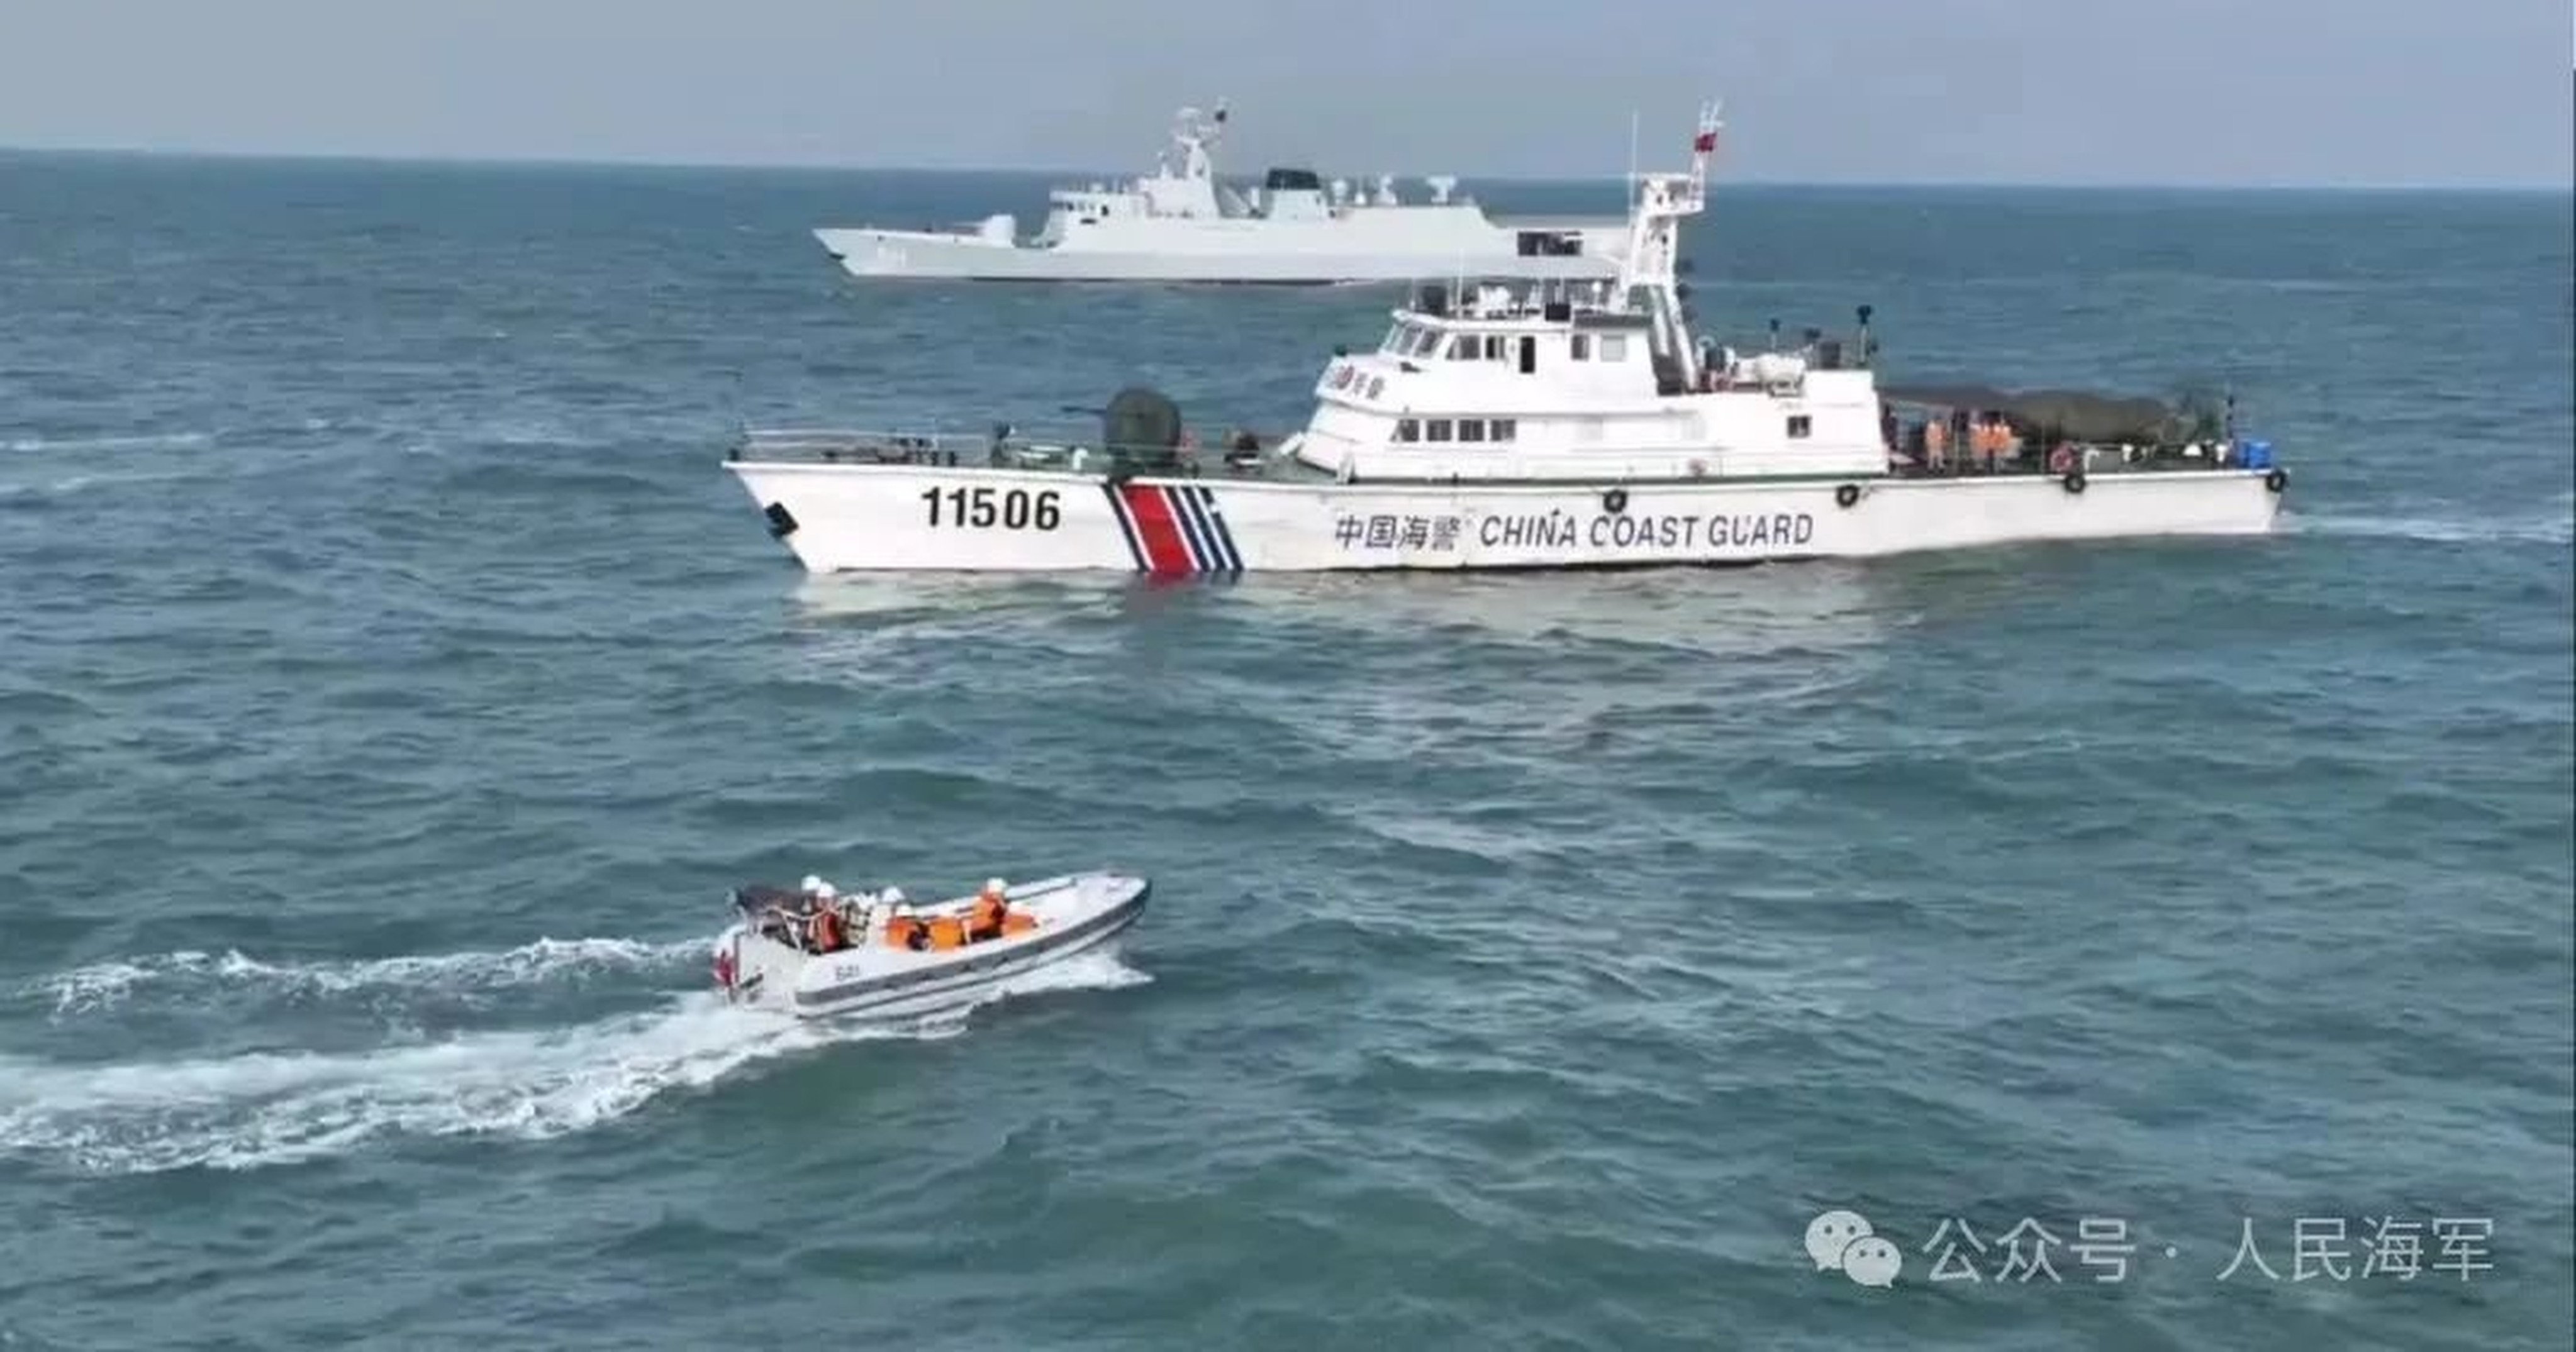 The PLA naval division in charge of the Taiwan Strait and the East China Sea said it teamed up with the  coastguard for a joint exercise but did not say where or when it took place. Photo: Eastern Theatre Command